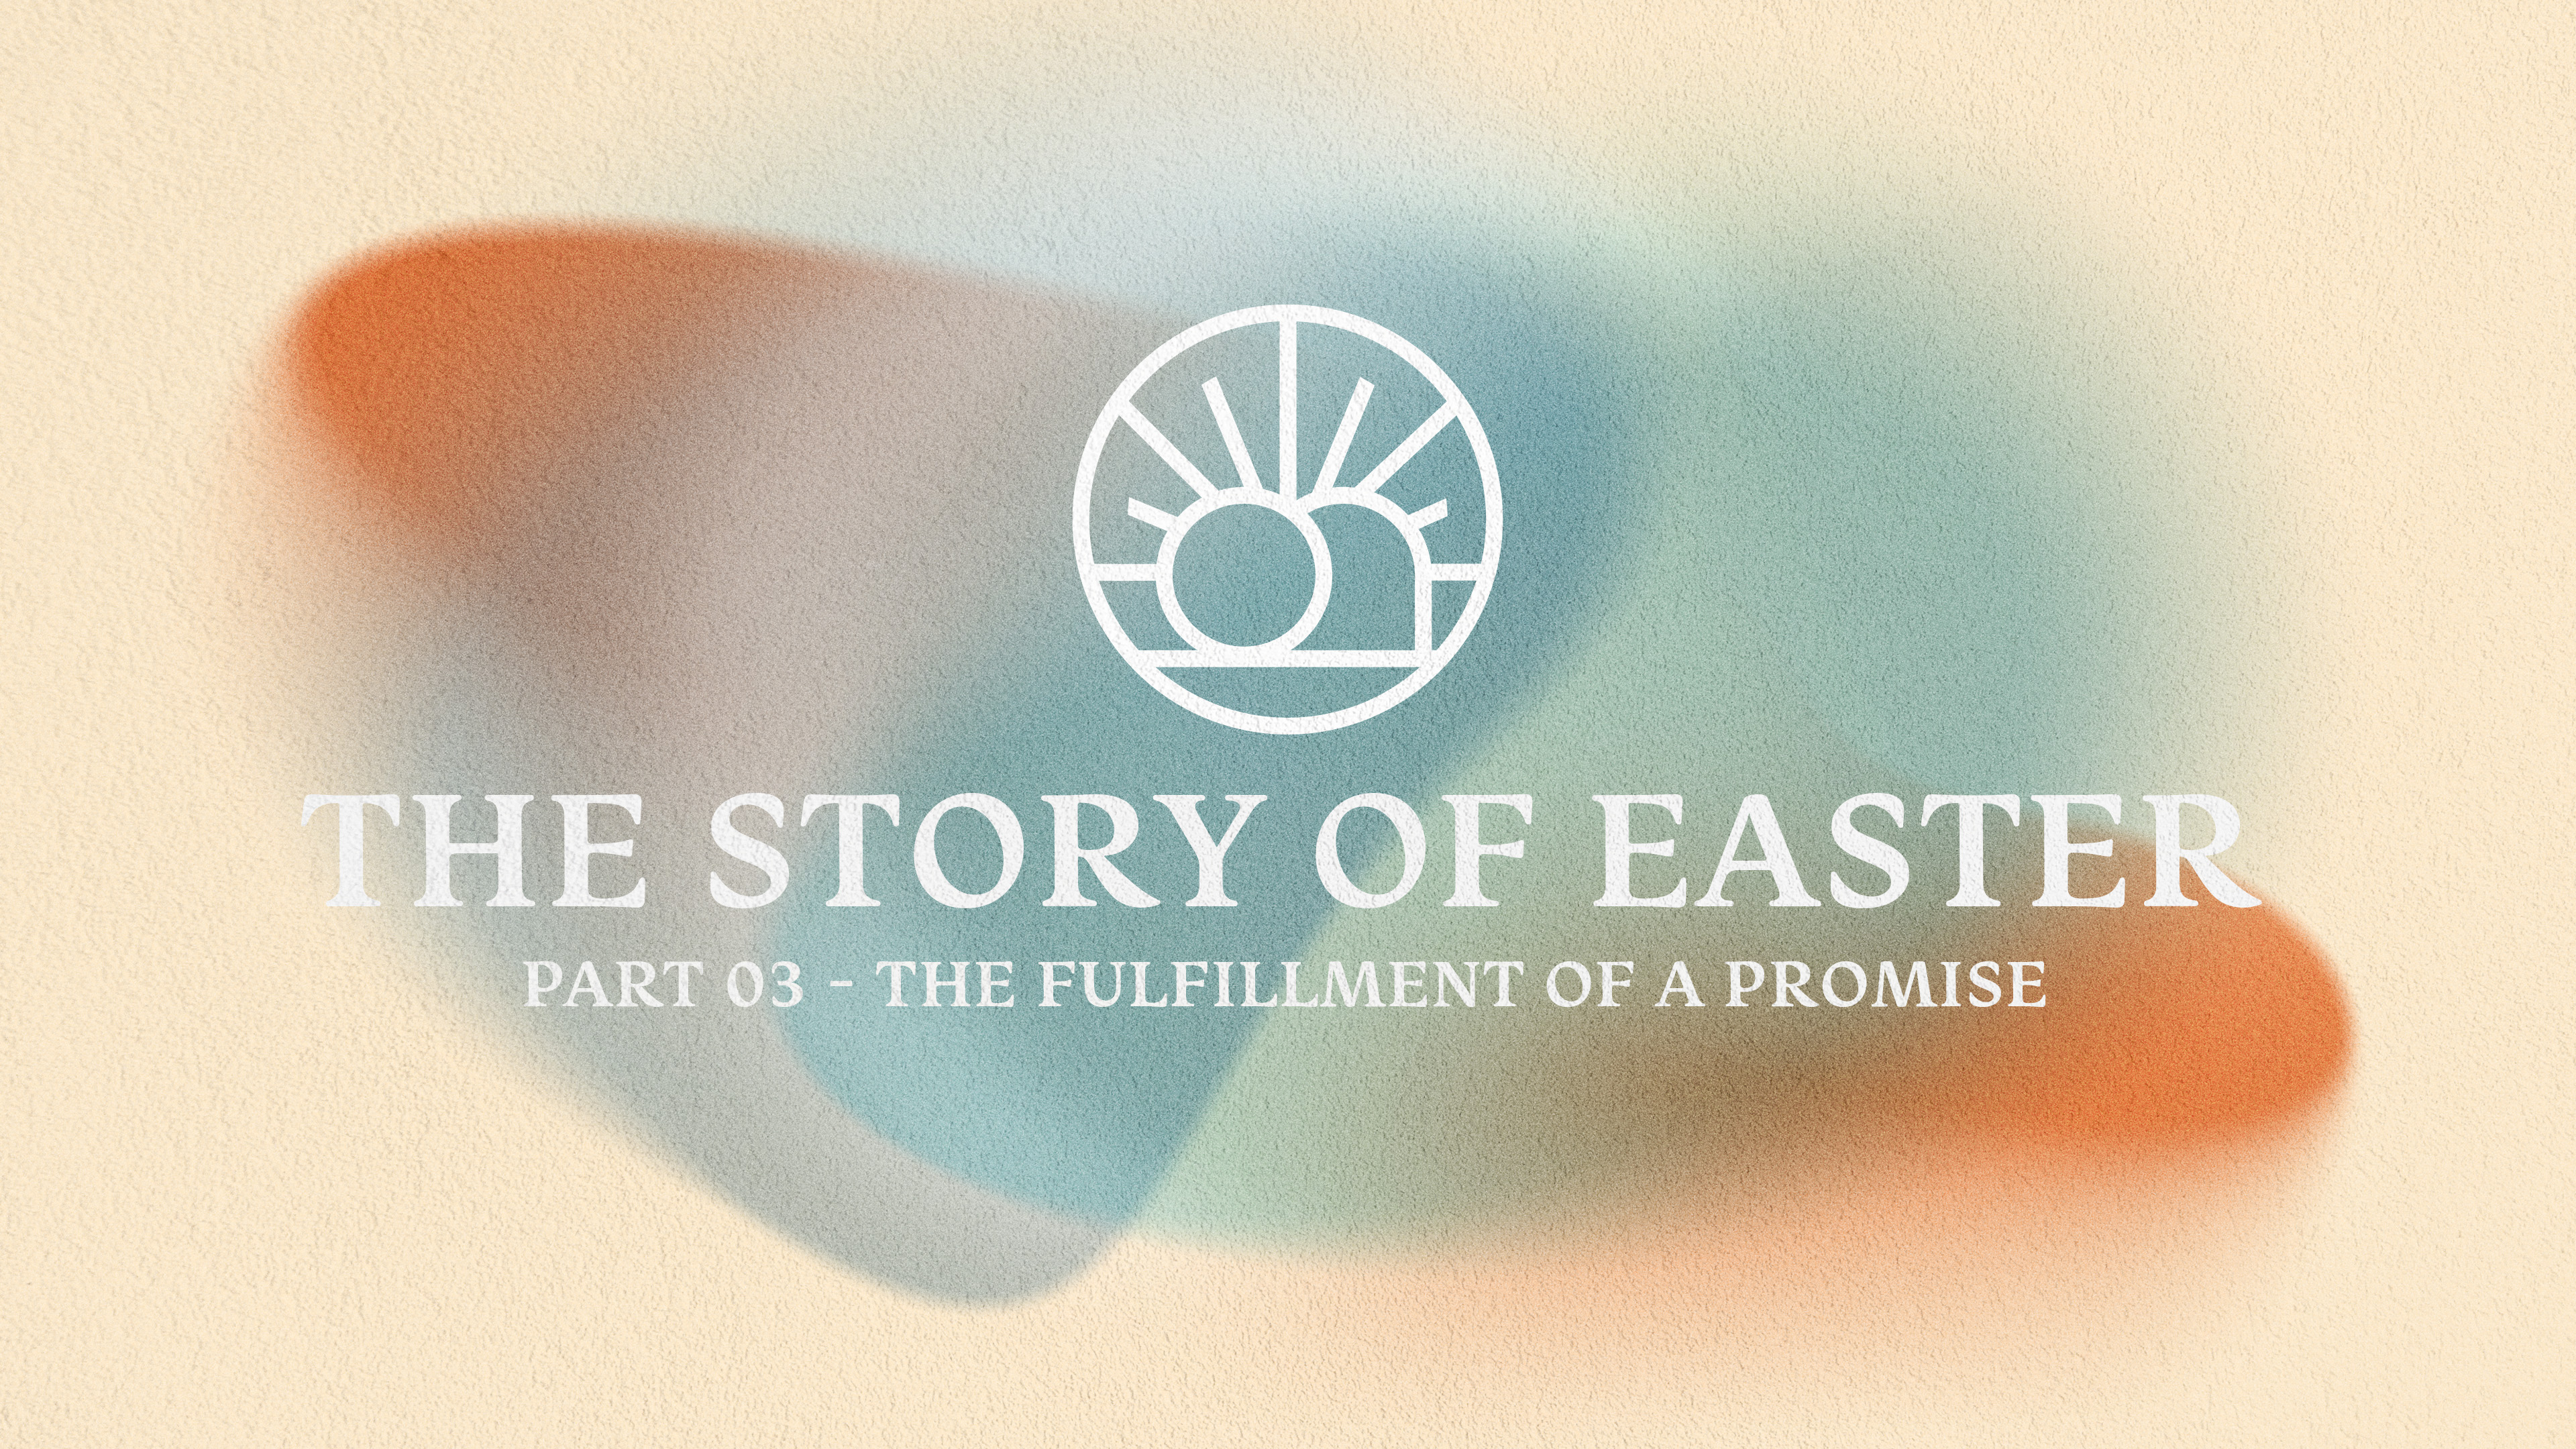 The Story of Easter Part 03